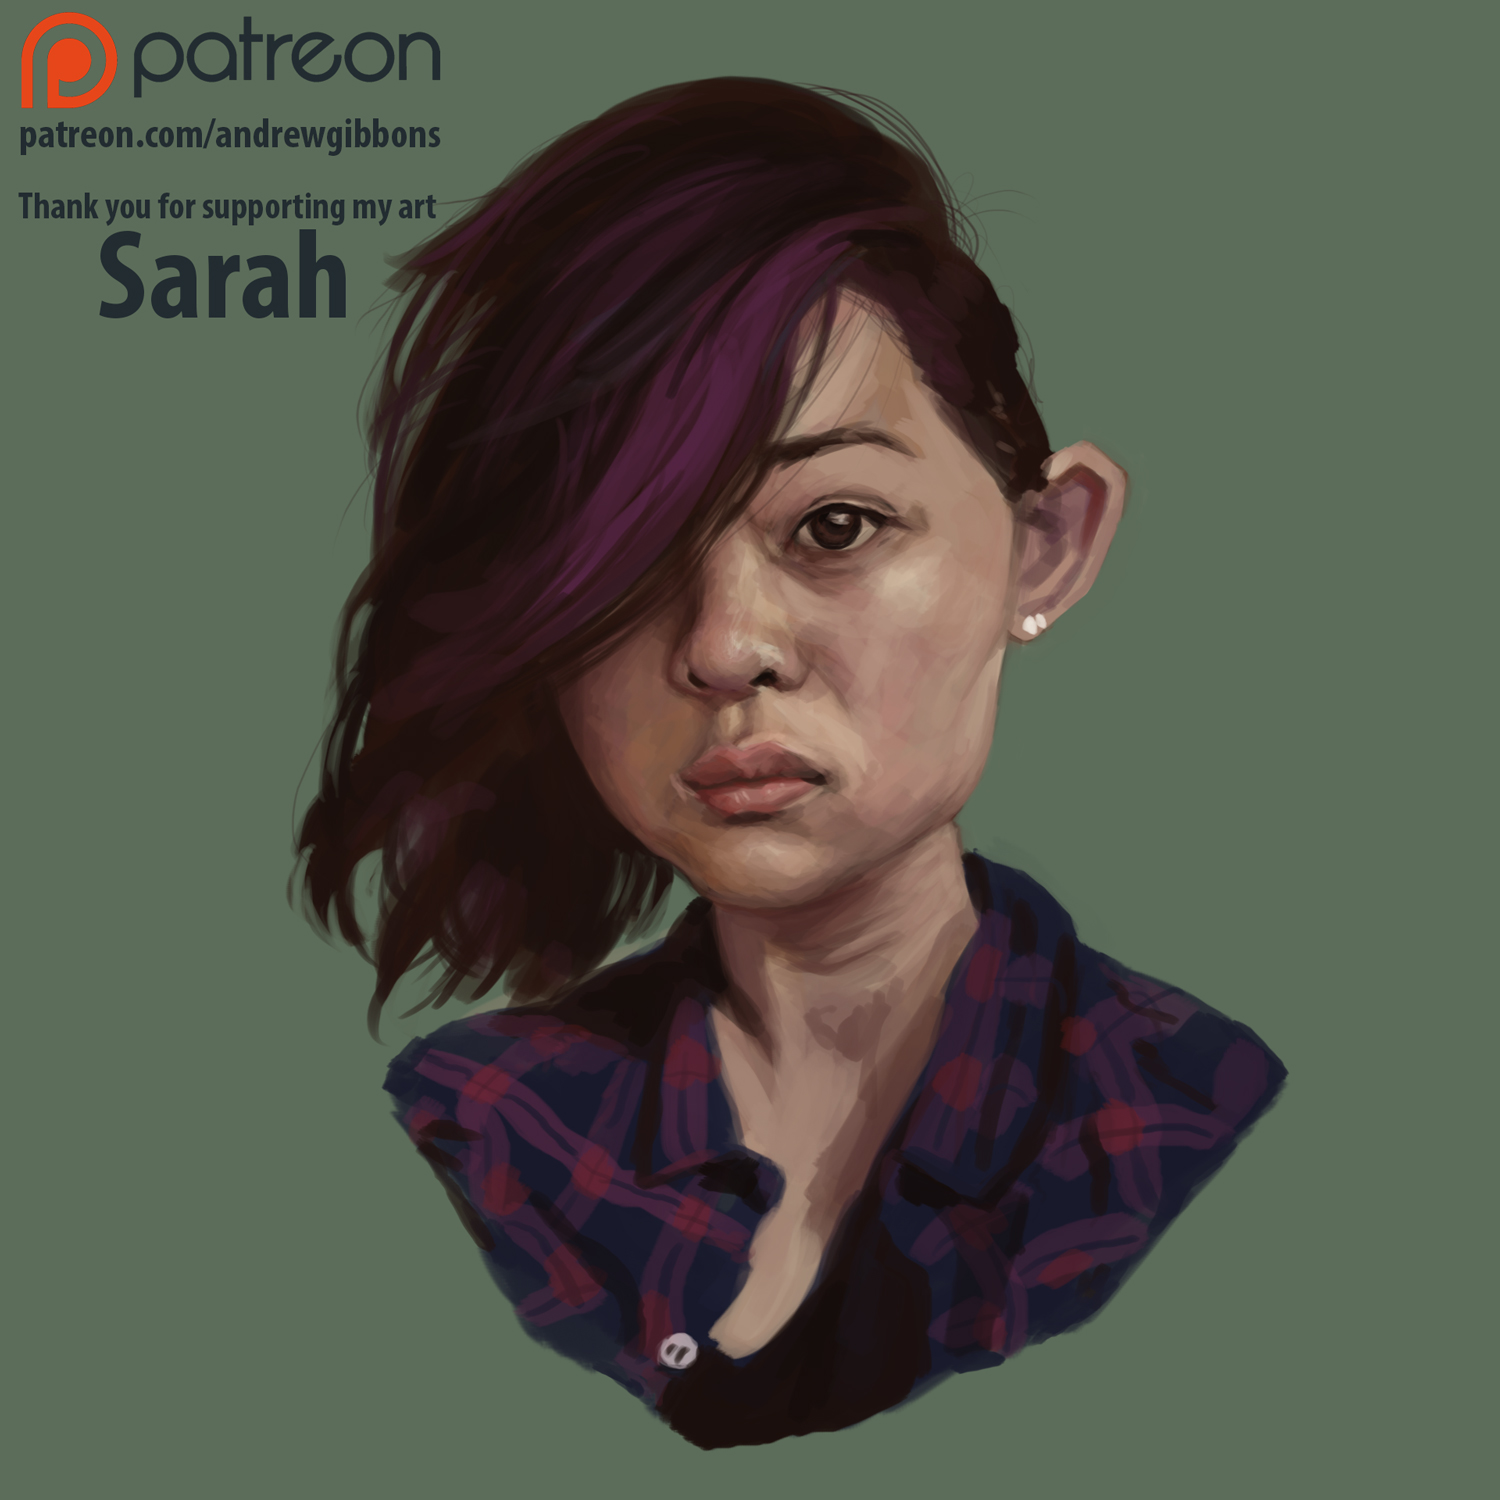 [Image: patron_portrait___sarah_by_andrew_gibbons-dbg5zpe.jpg]